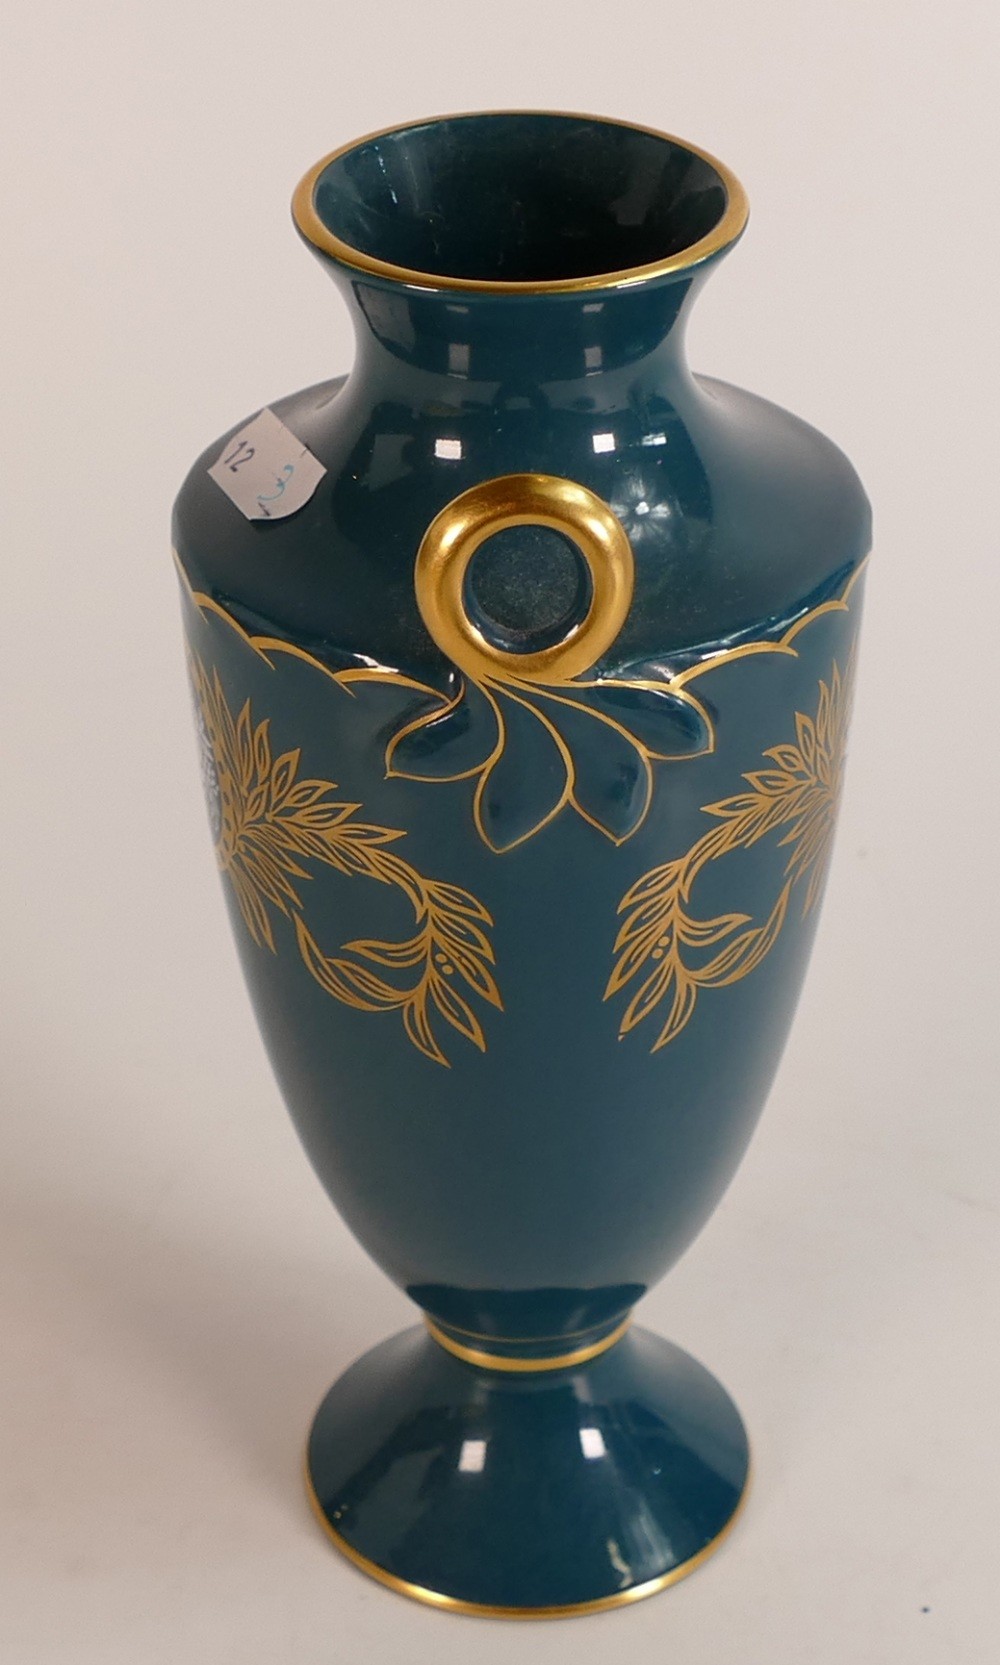 Minton Pate-sur-Pate two handled vase, gilded & decorated "Classical Cameo" for the Bicentenary 1993 - Image 4 of 5